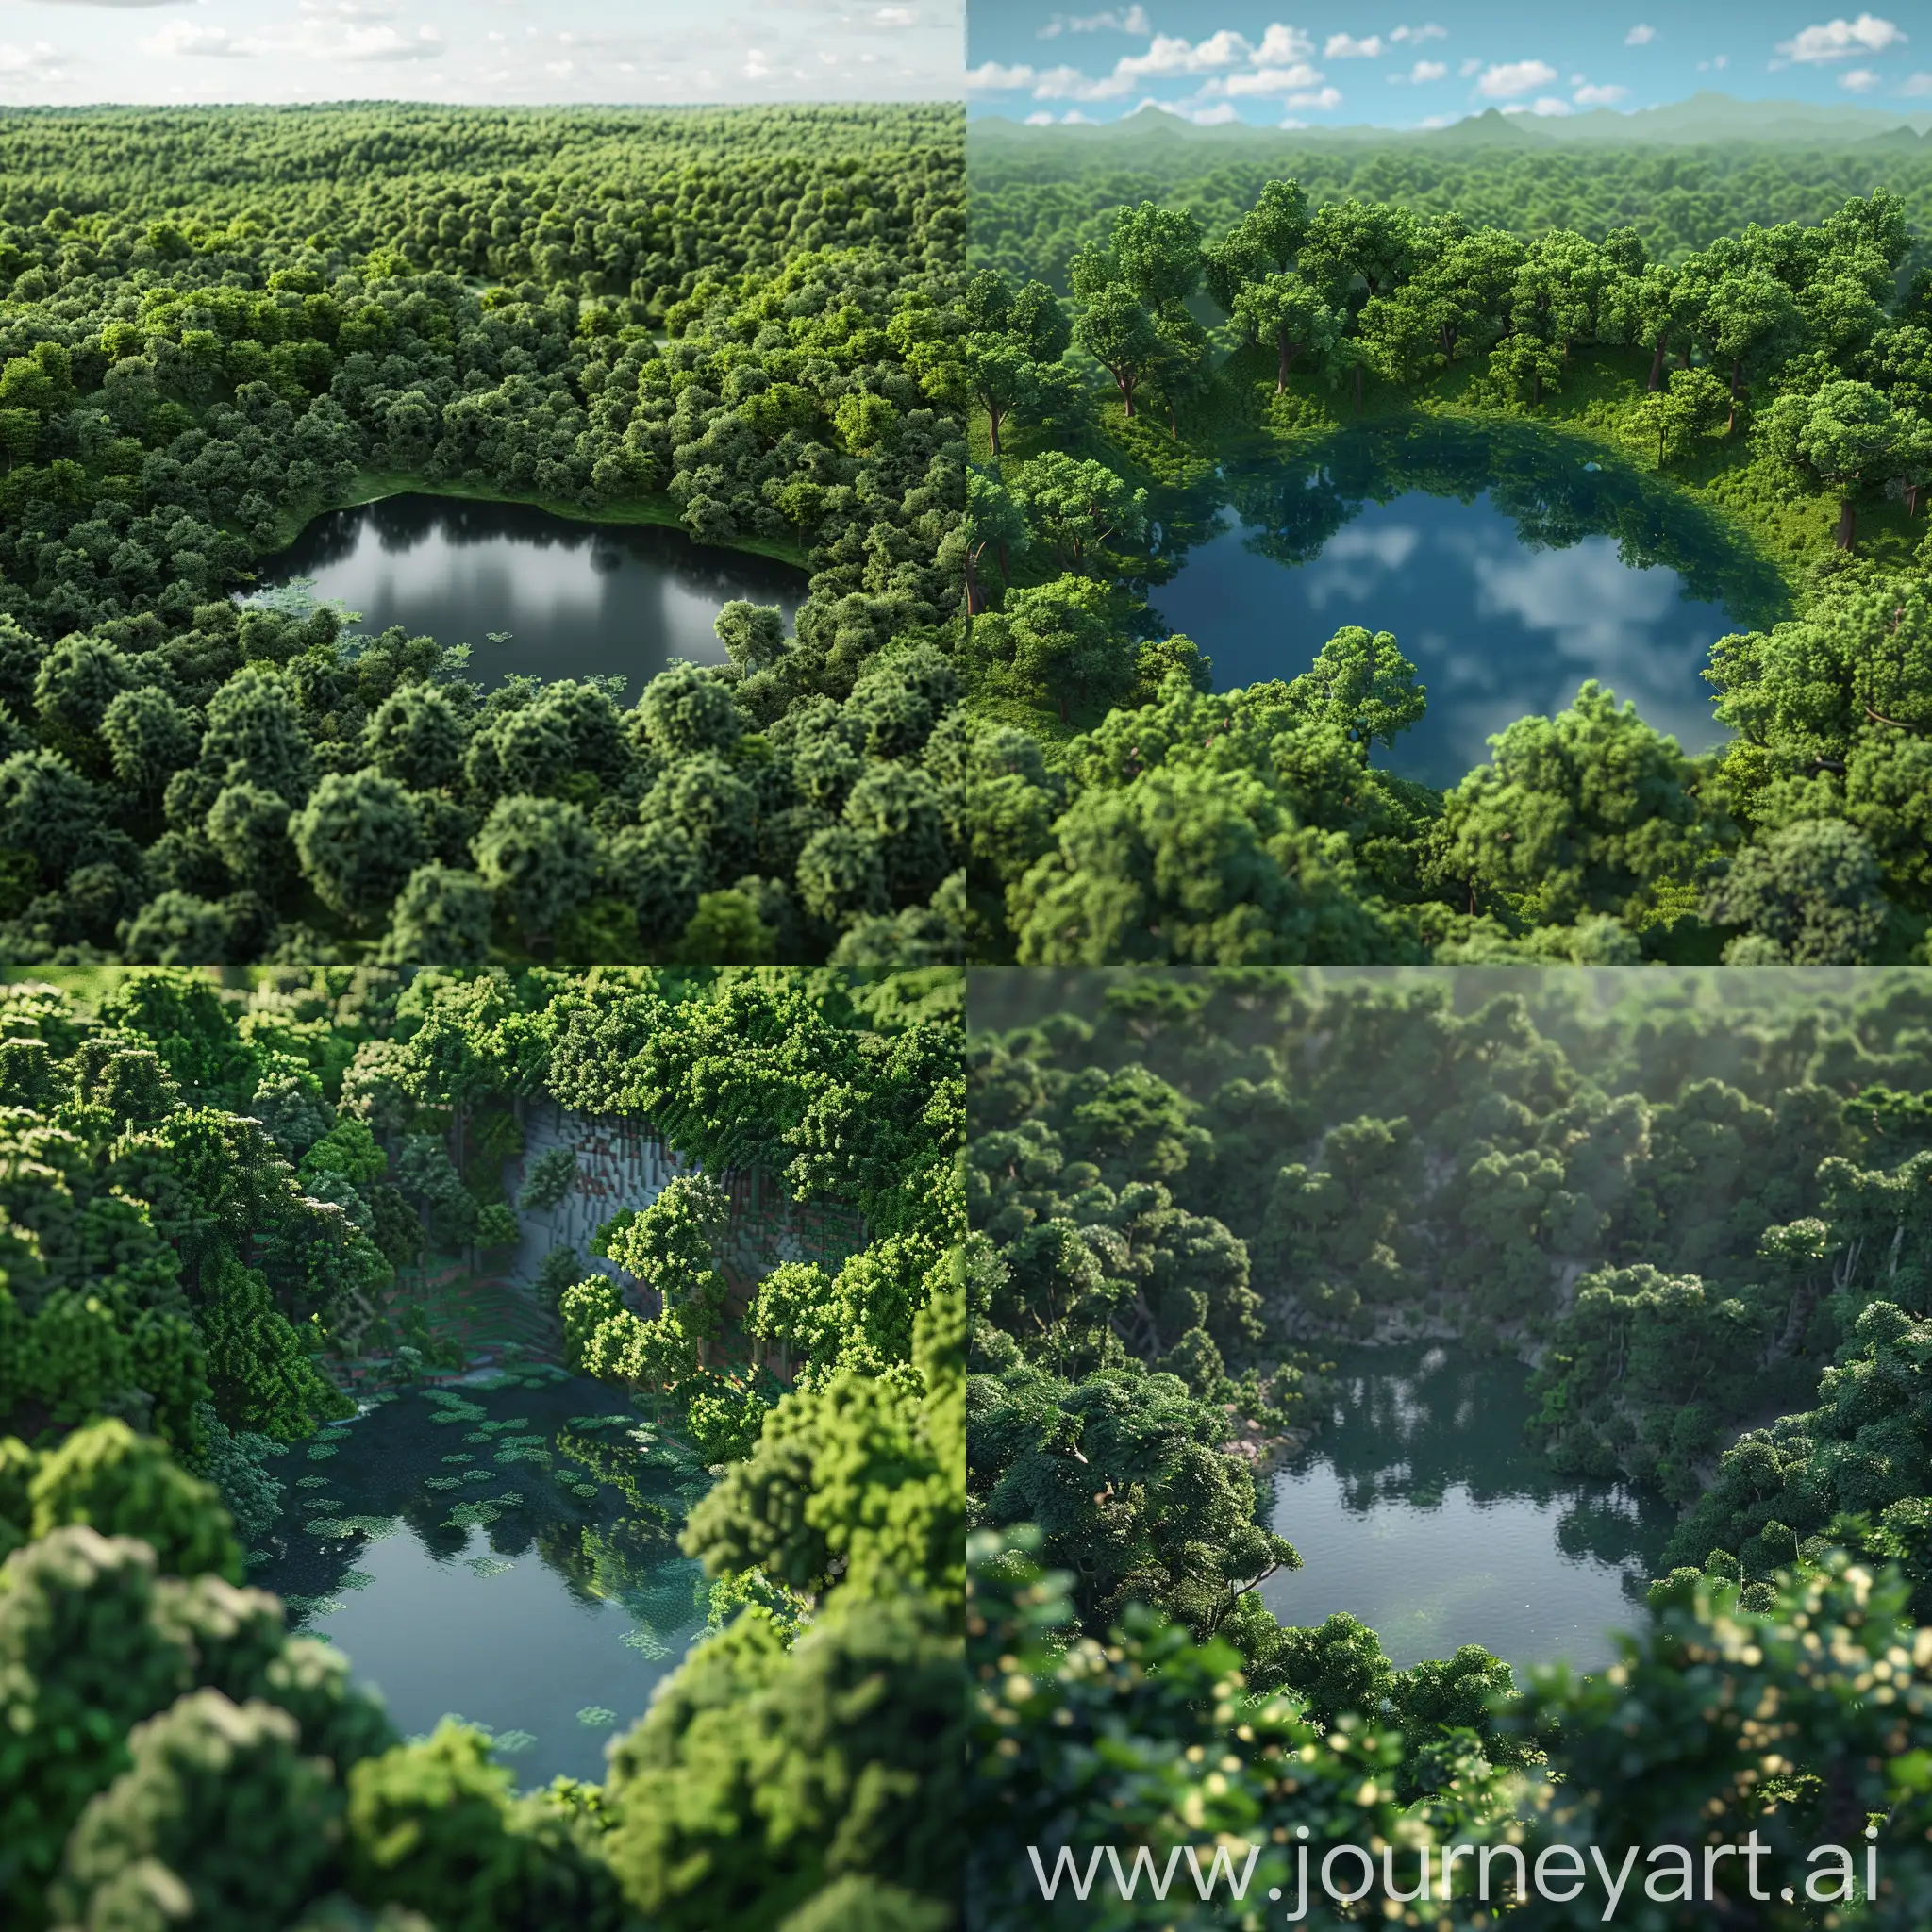 generate a forest with a pond or river that is viewed from afar like with a bird's eyeview
